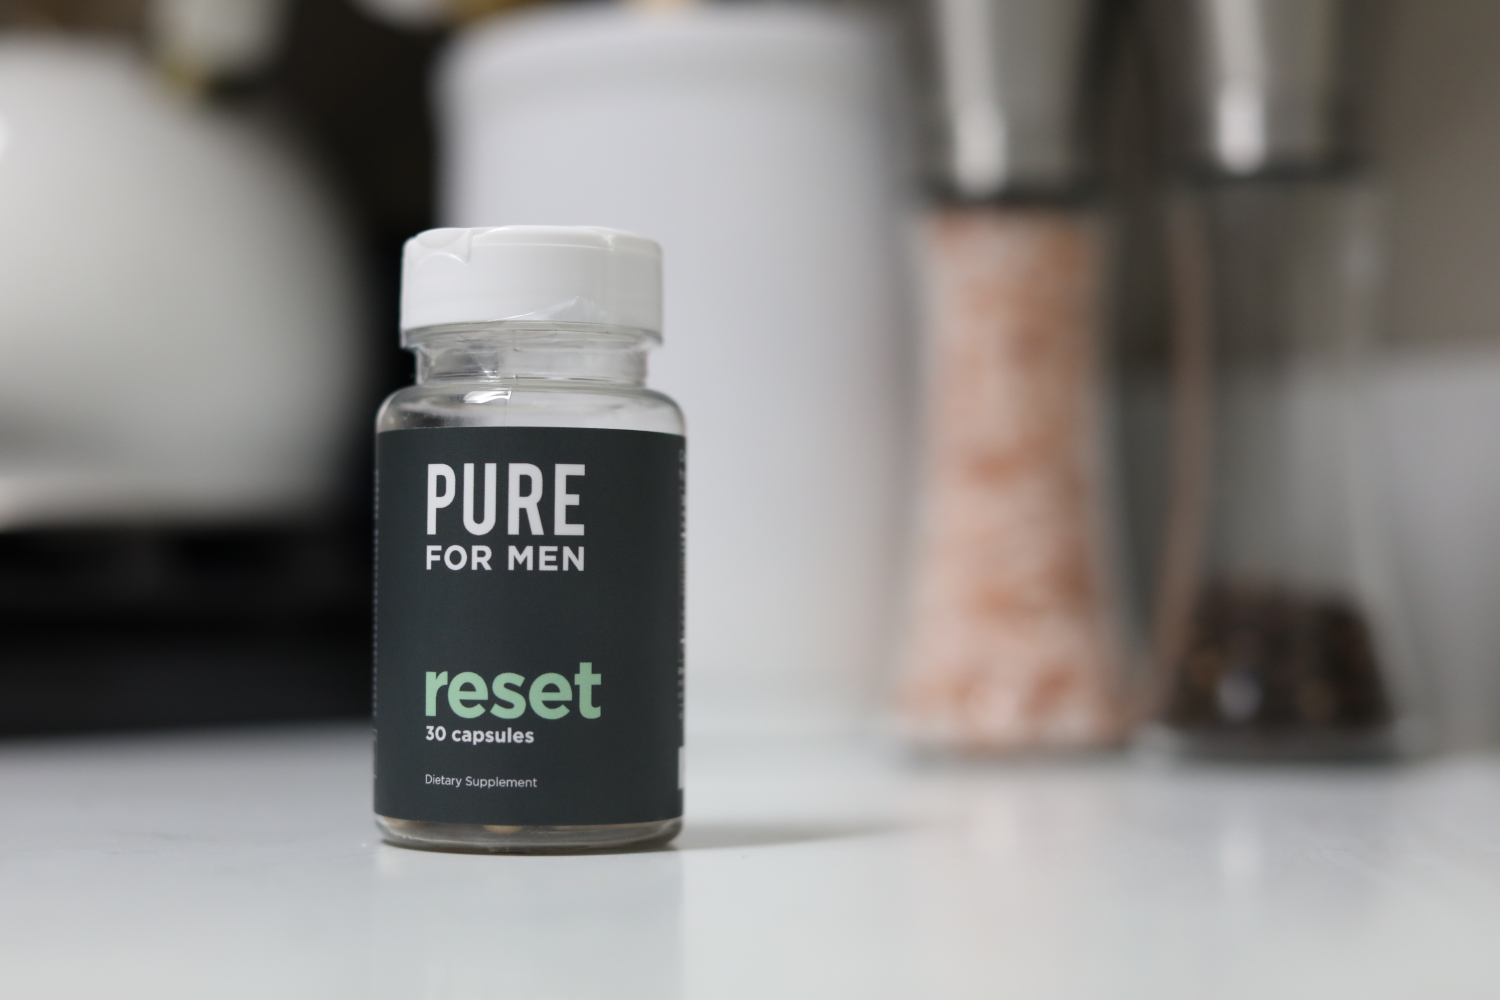 A bottle of Pure for Men's Reset cleanse pills sits on a kitchen countertop